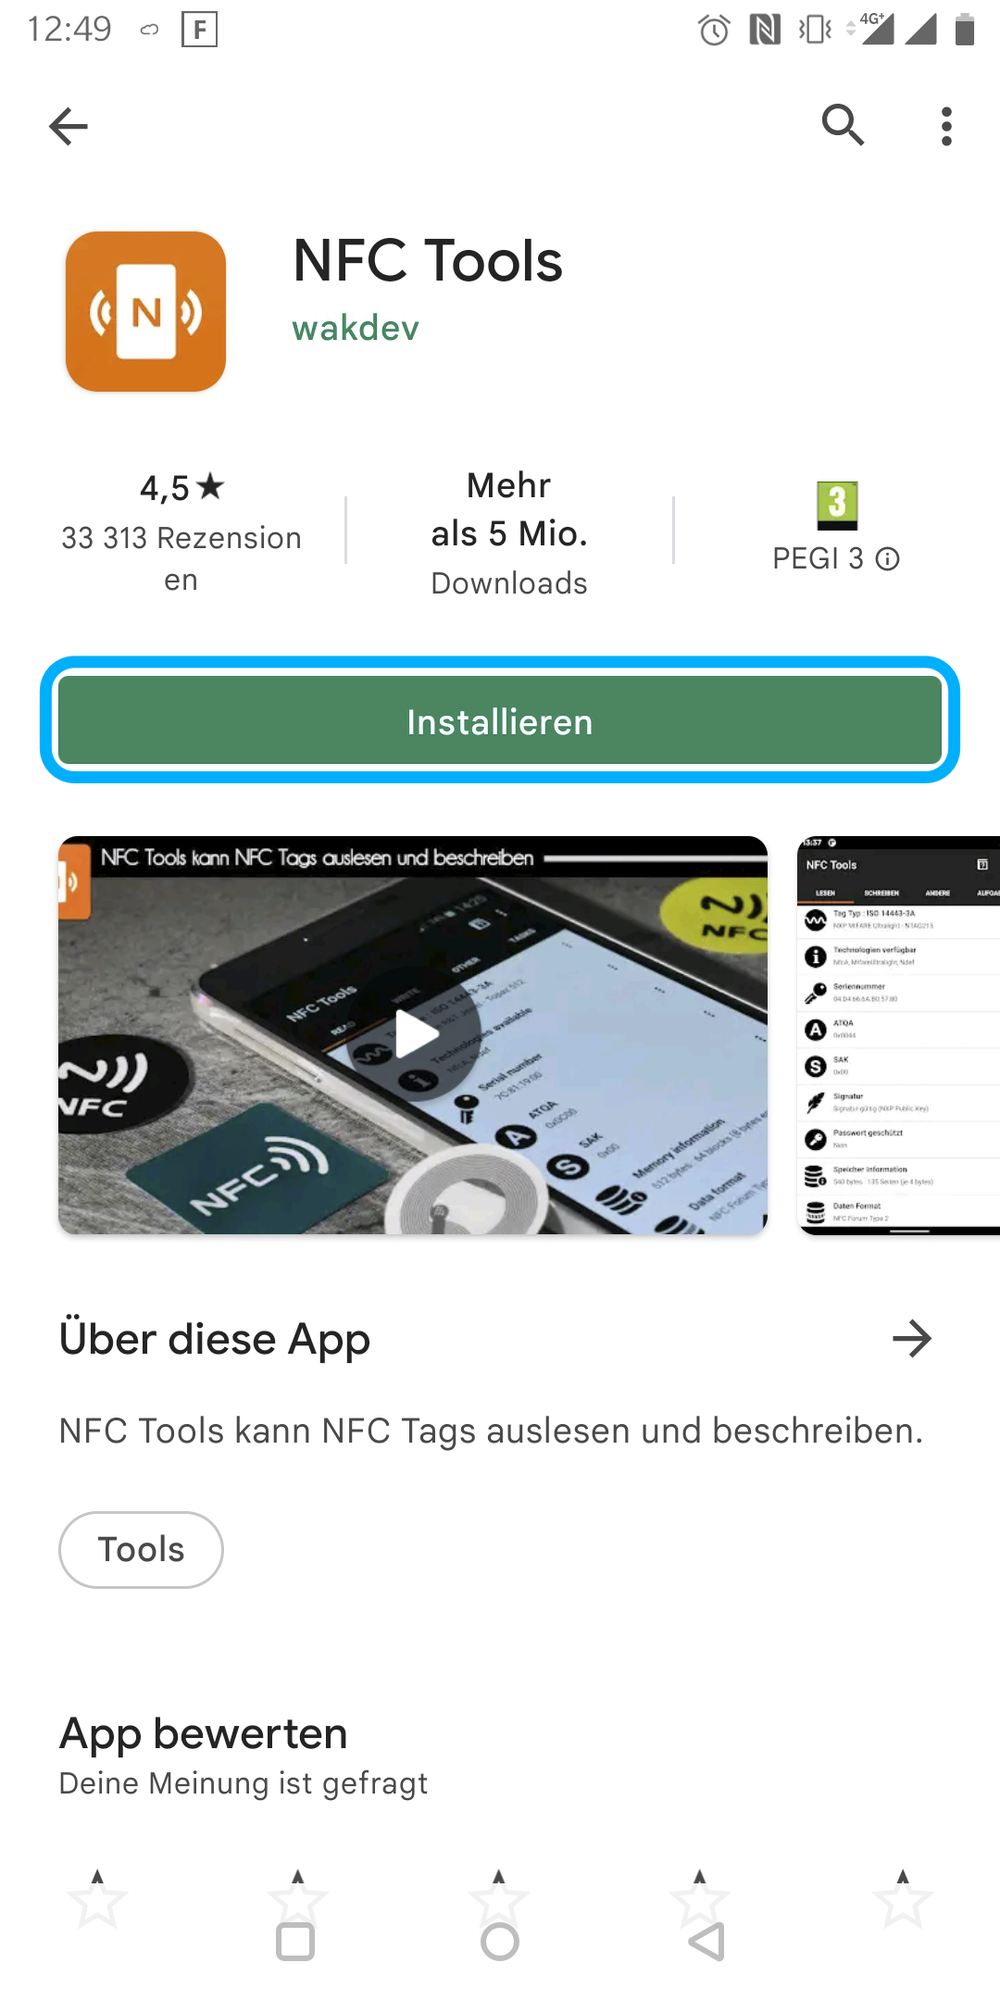 Download NFC Tools im Google Play Store